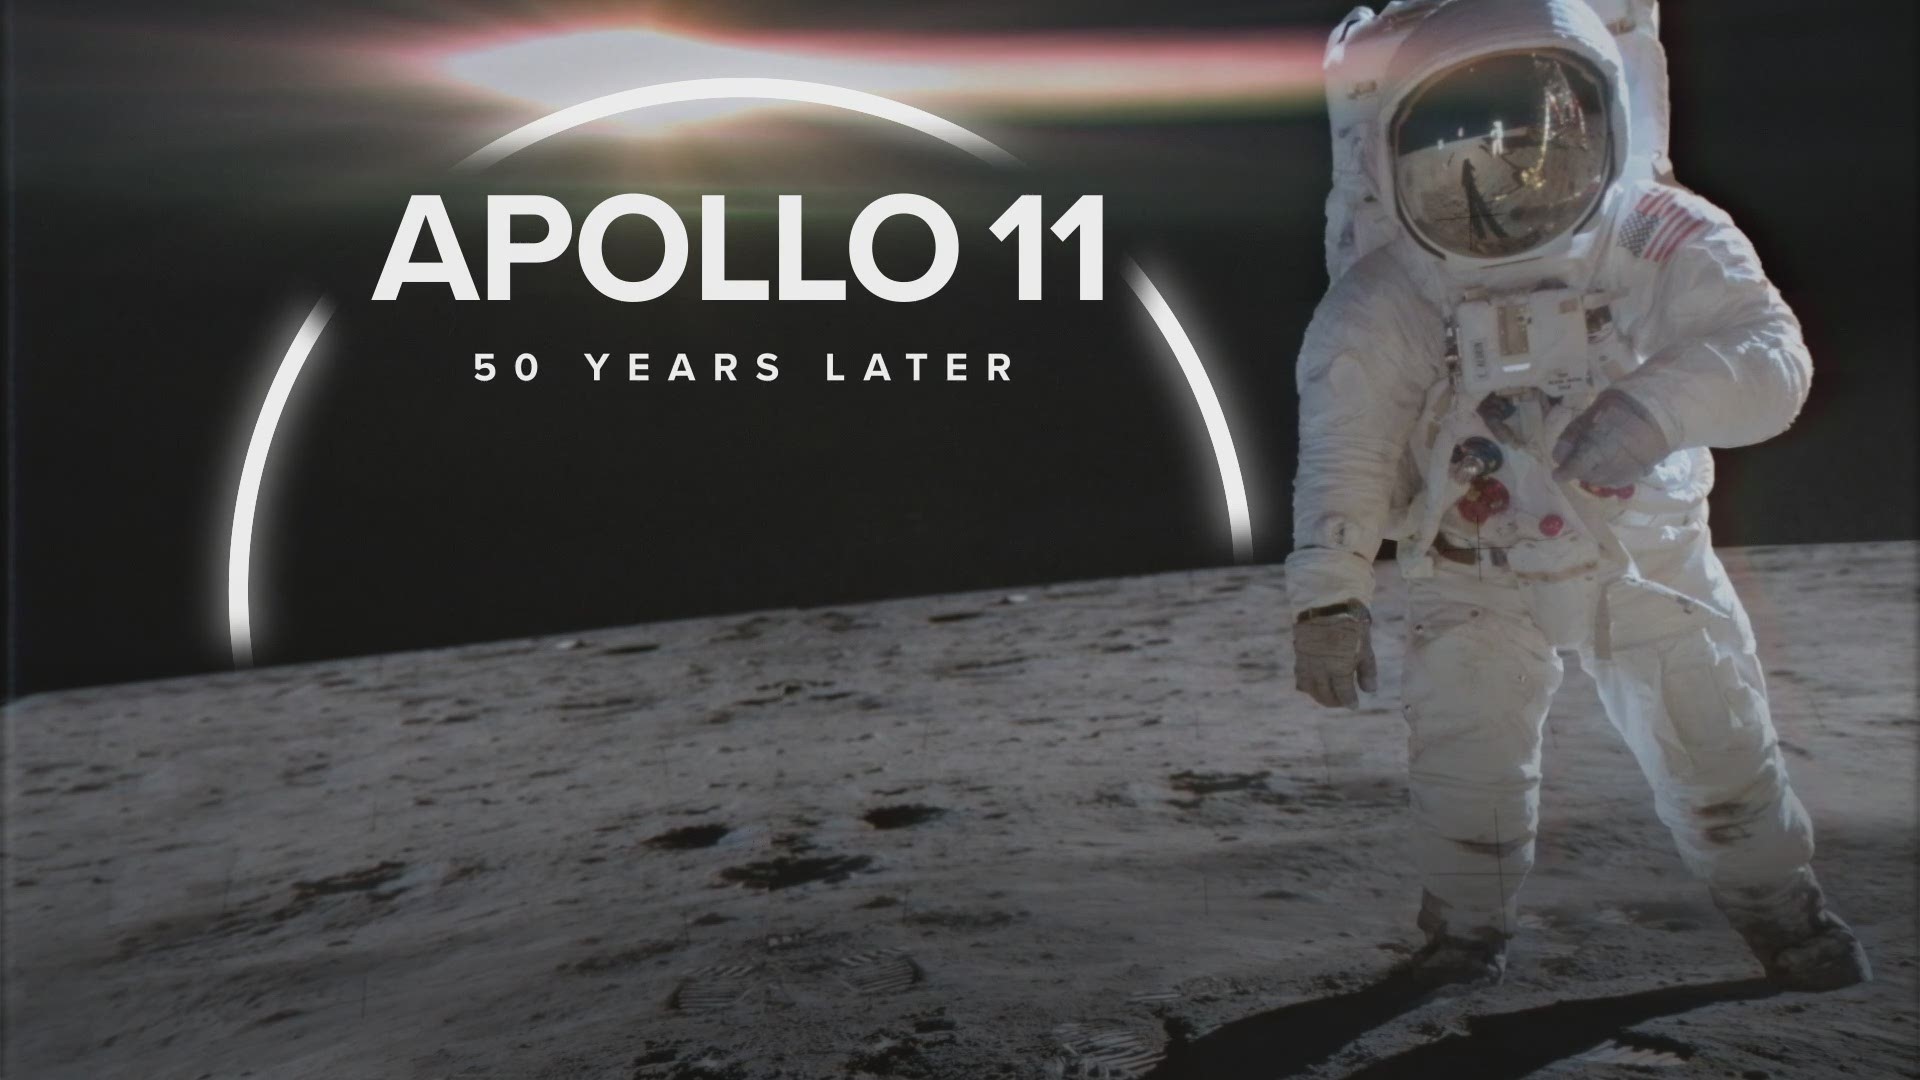 It was the mission that first put man on the moon. But here are 8 facts you may not know about Apollo 11's history.